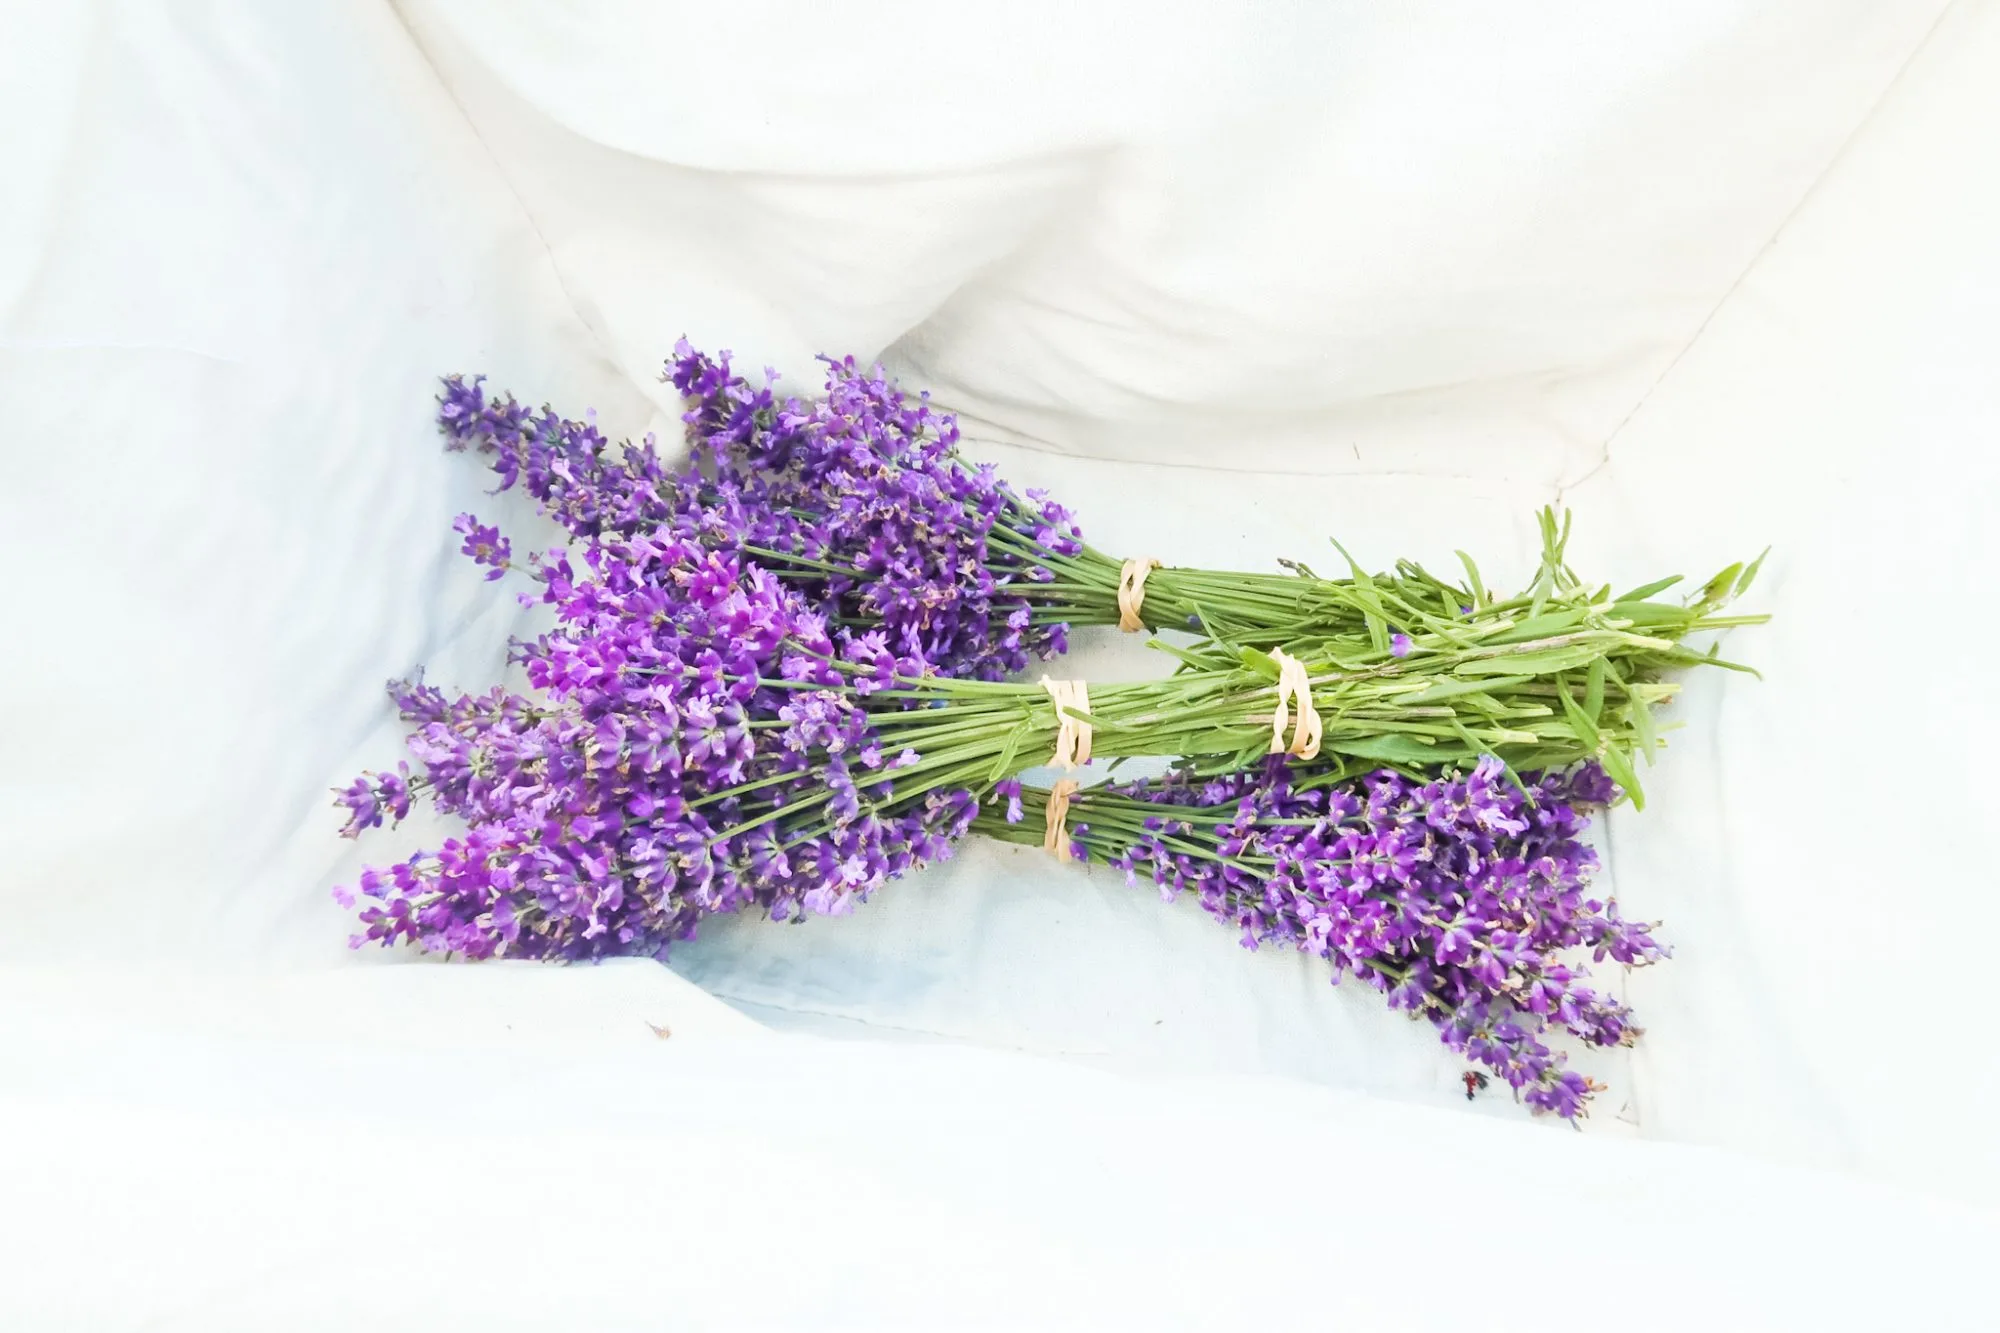 How To Dry Lavender To Preserve Fragrance And Color (3 Easy Steps)